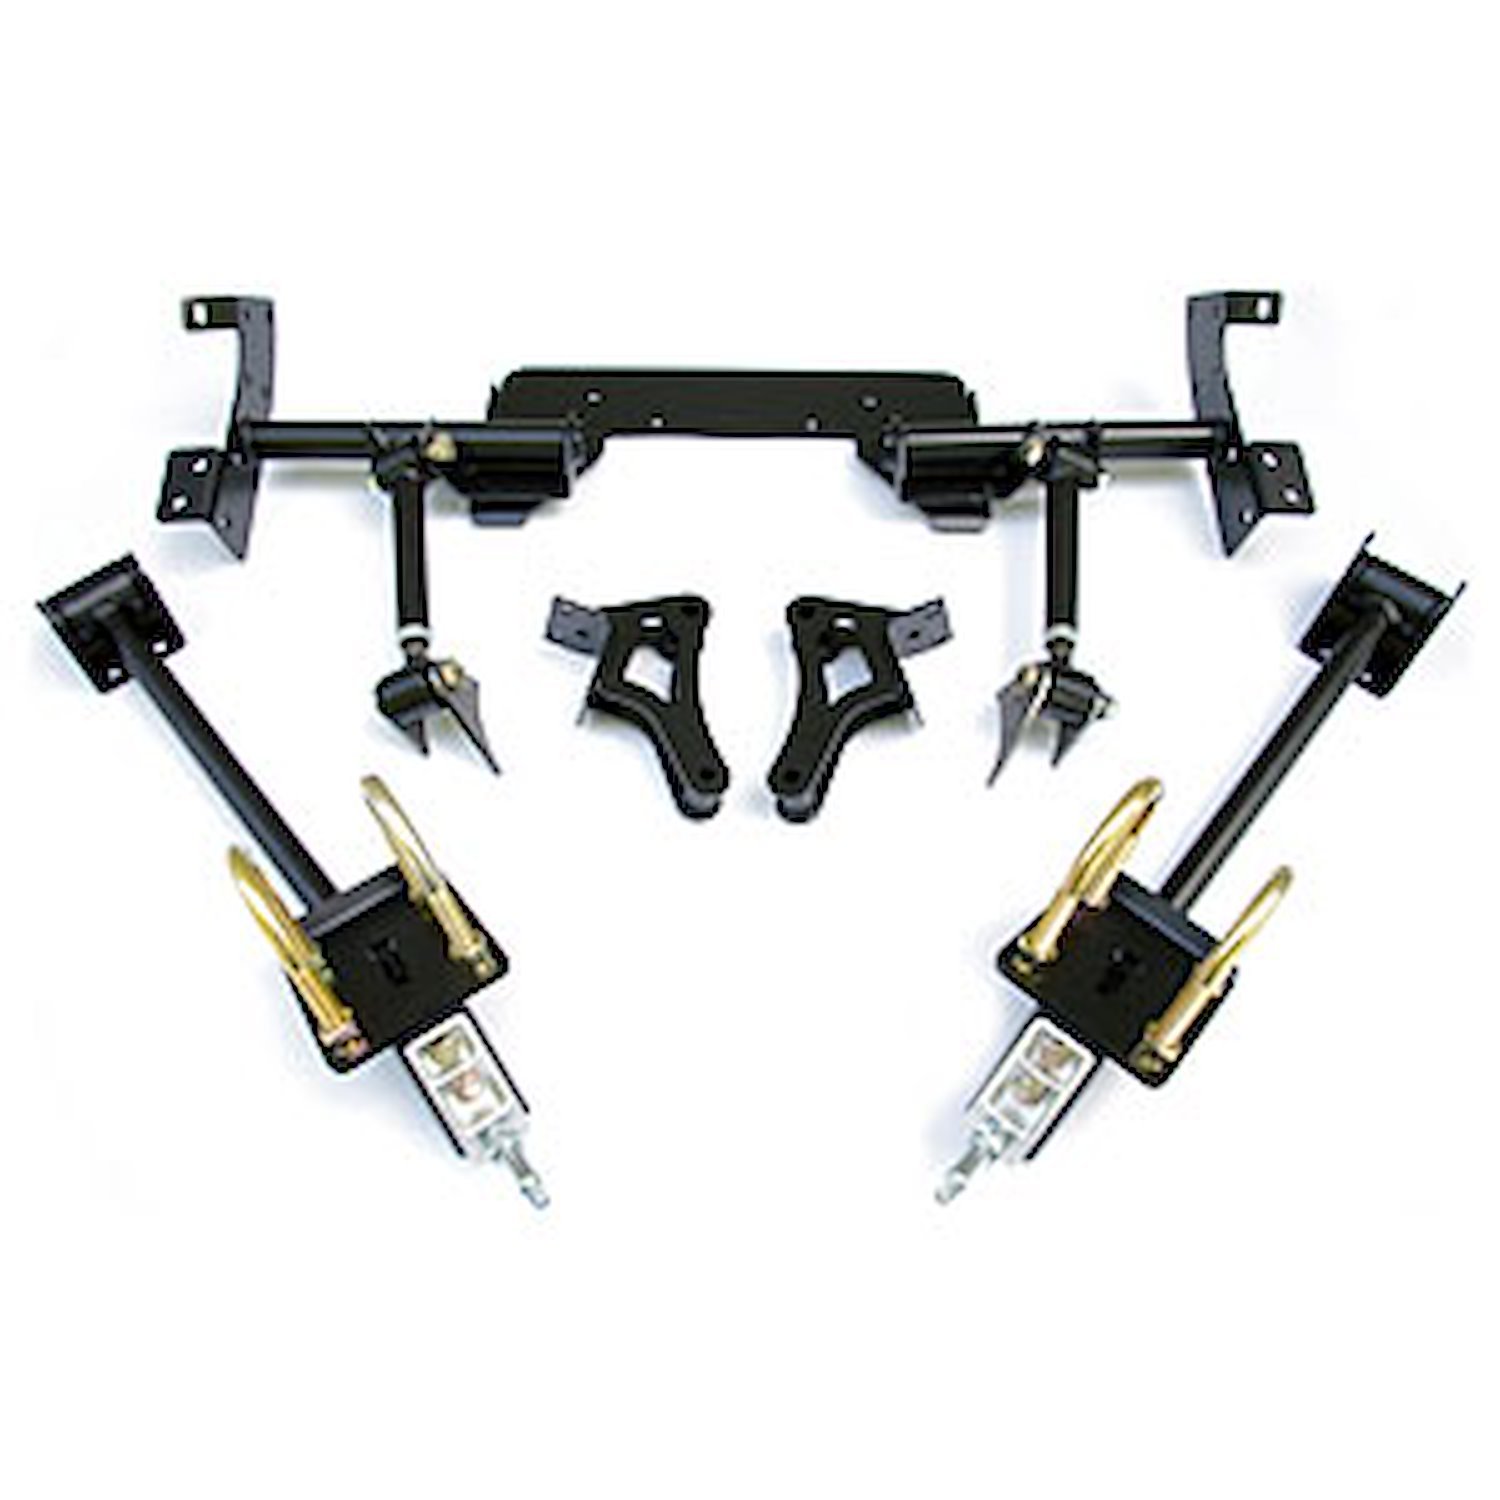 Bolt-On 4-Link Rear Suspension System 1970-1974 Dodge Challanger / Plymouth Barracuda (Chrysler E-Body)